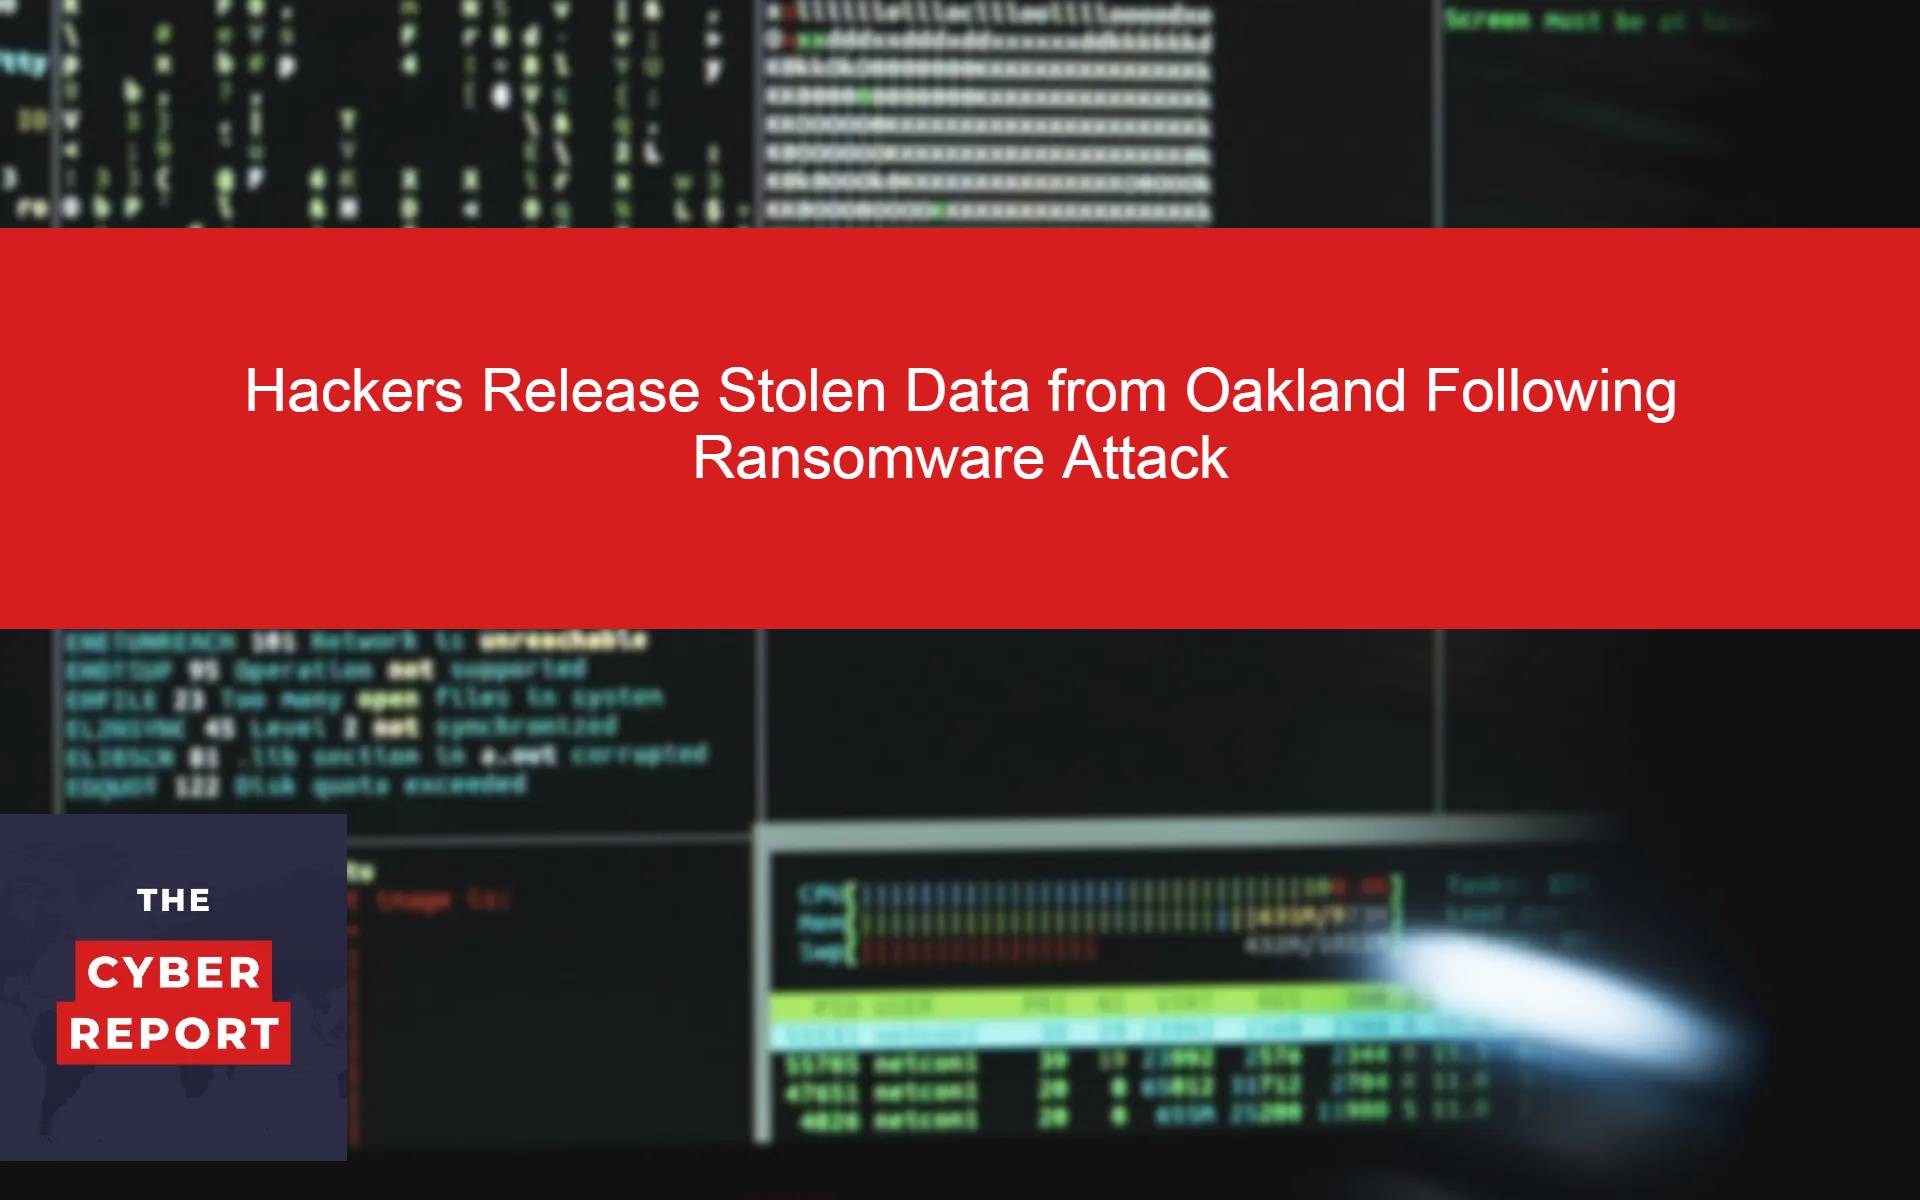 Hackers Release Stolen Data from Oakland Following Ransomware Attack